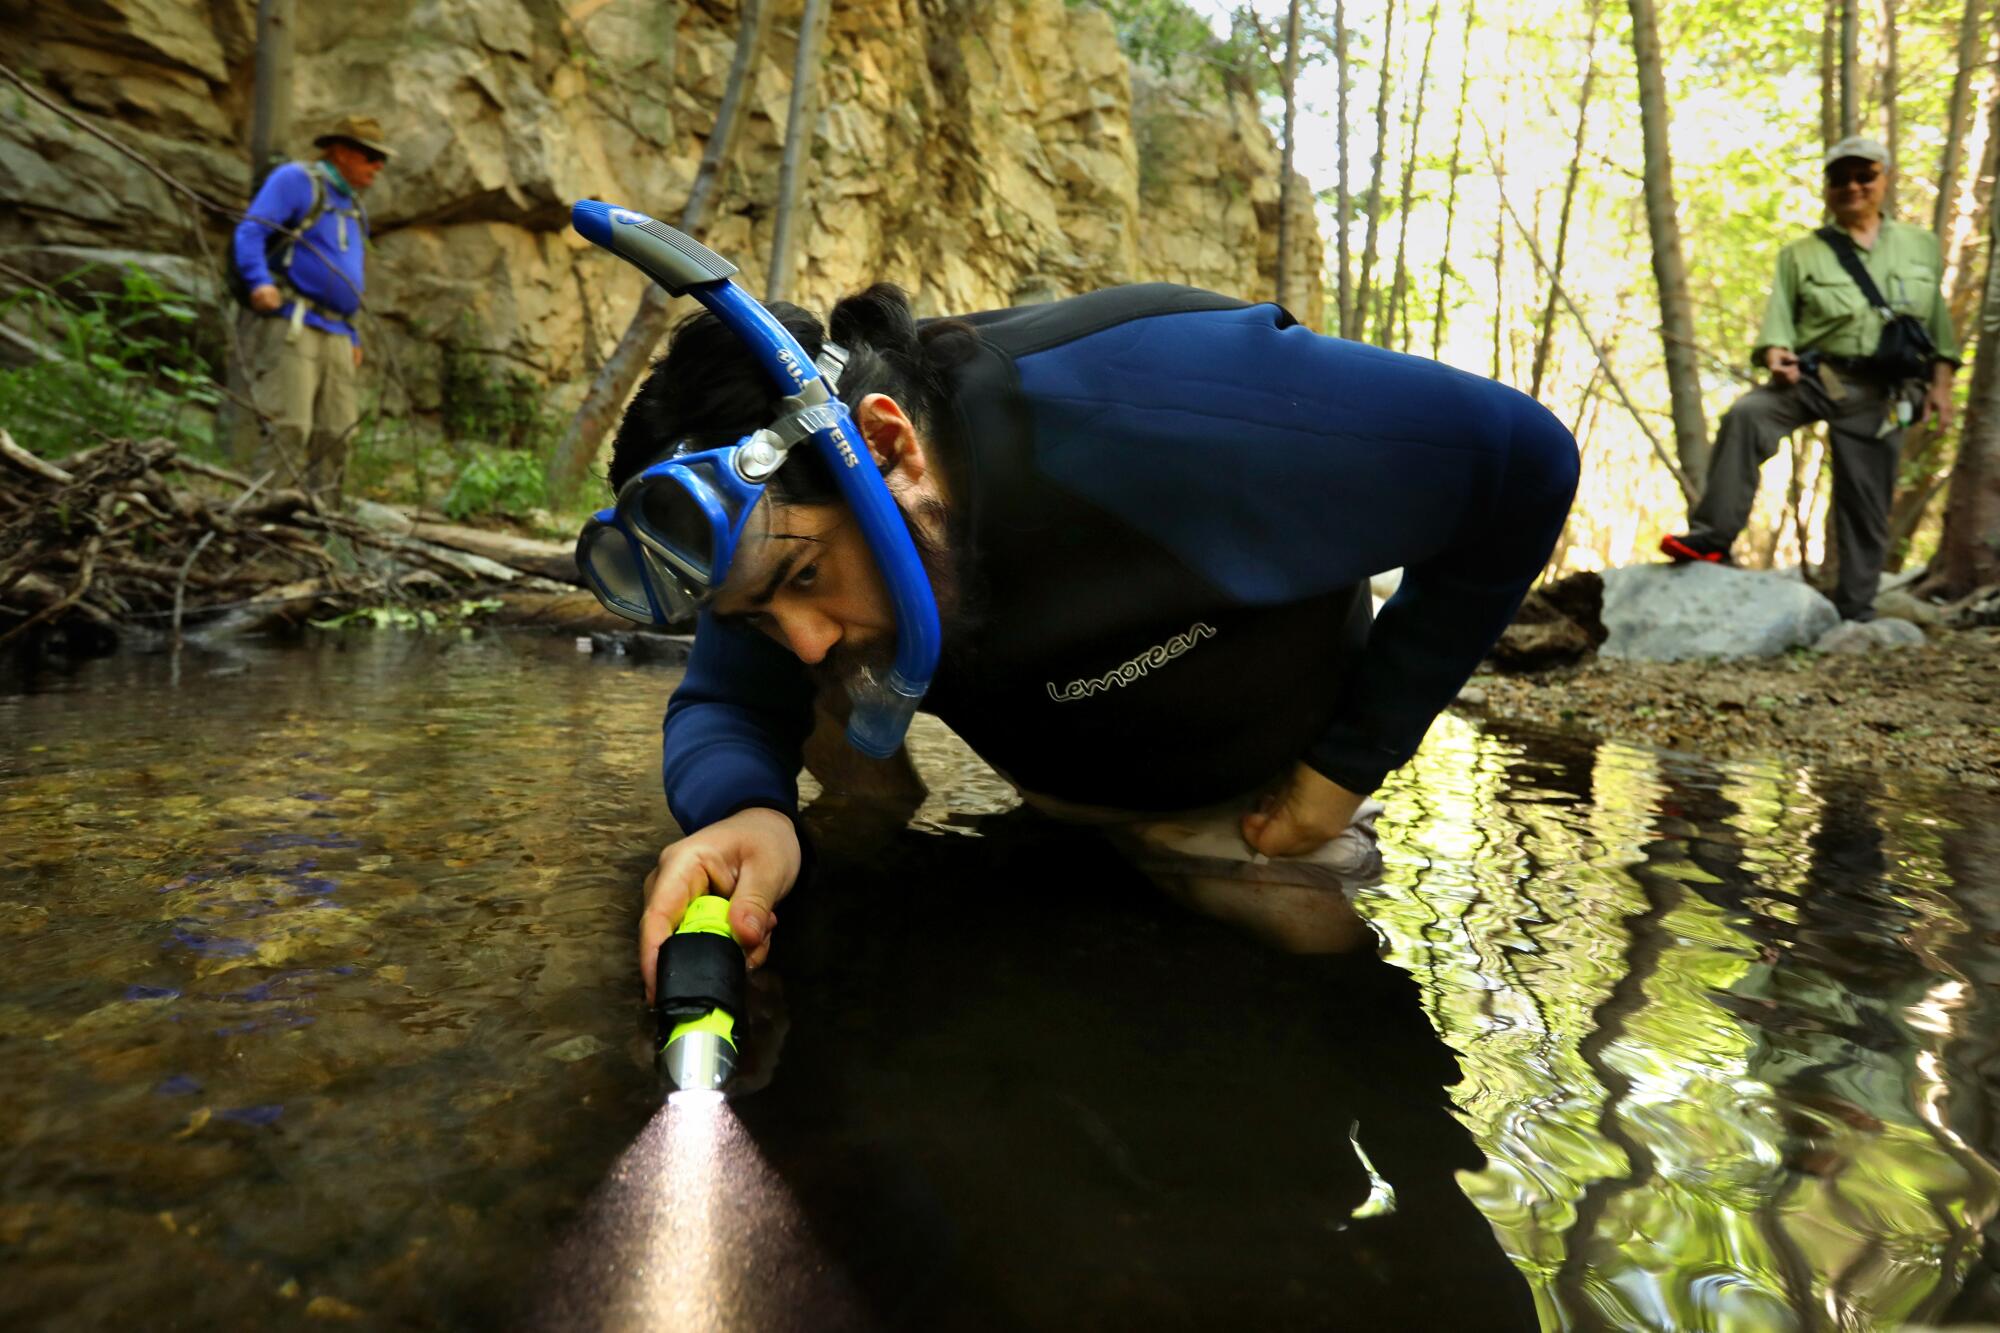 Angel Pinedo looks for rainbow trout and other fish in the Arroyo Seco.